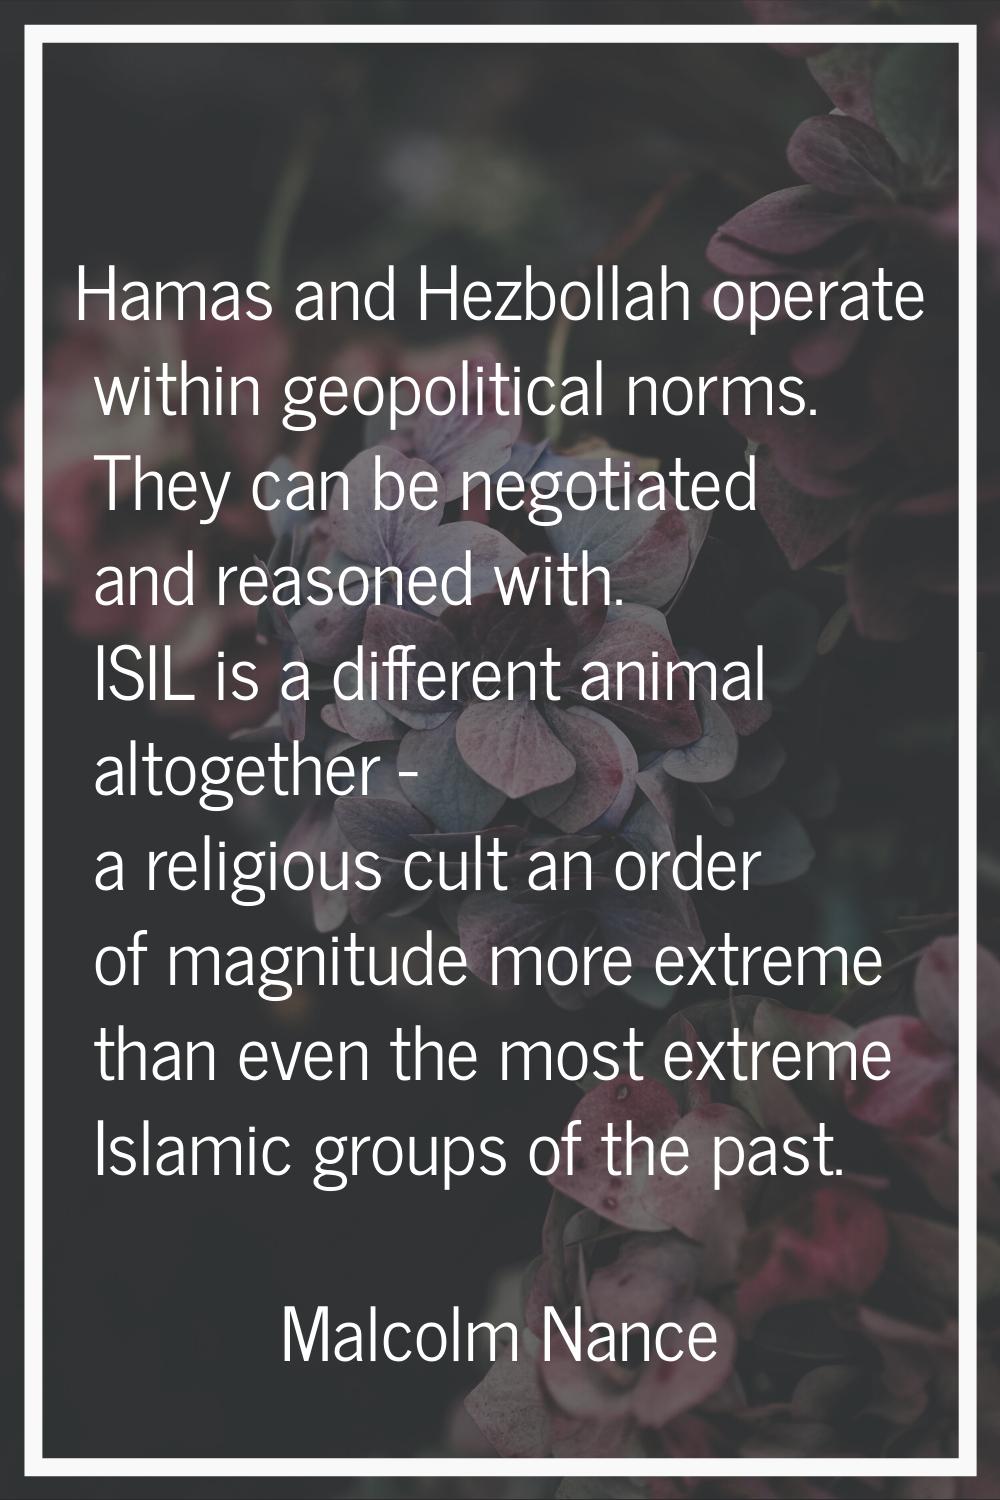 Hamas and Hezbollah operate within geopolitical norms. They can be negotiated and reasoned with. IS